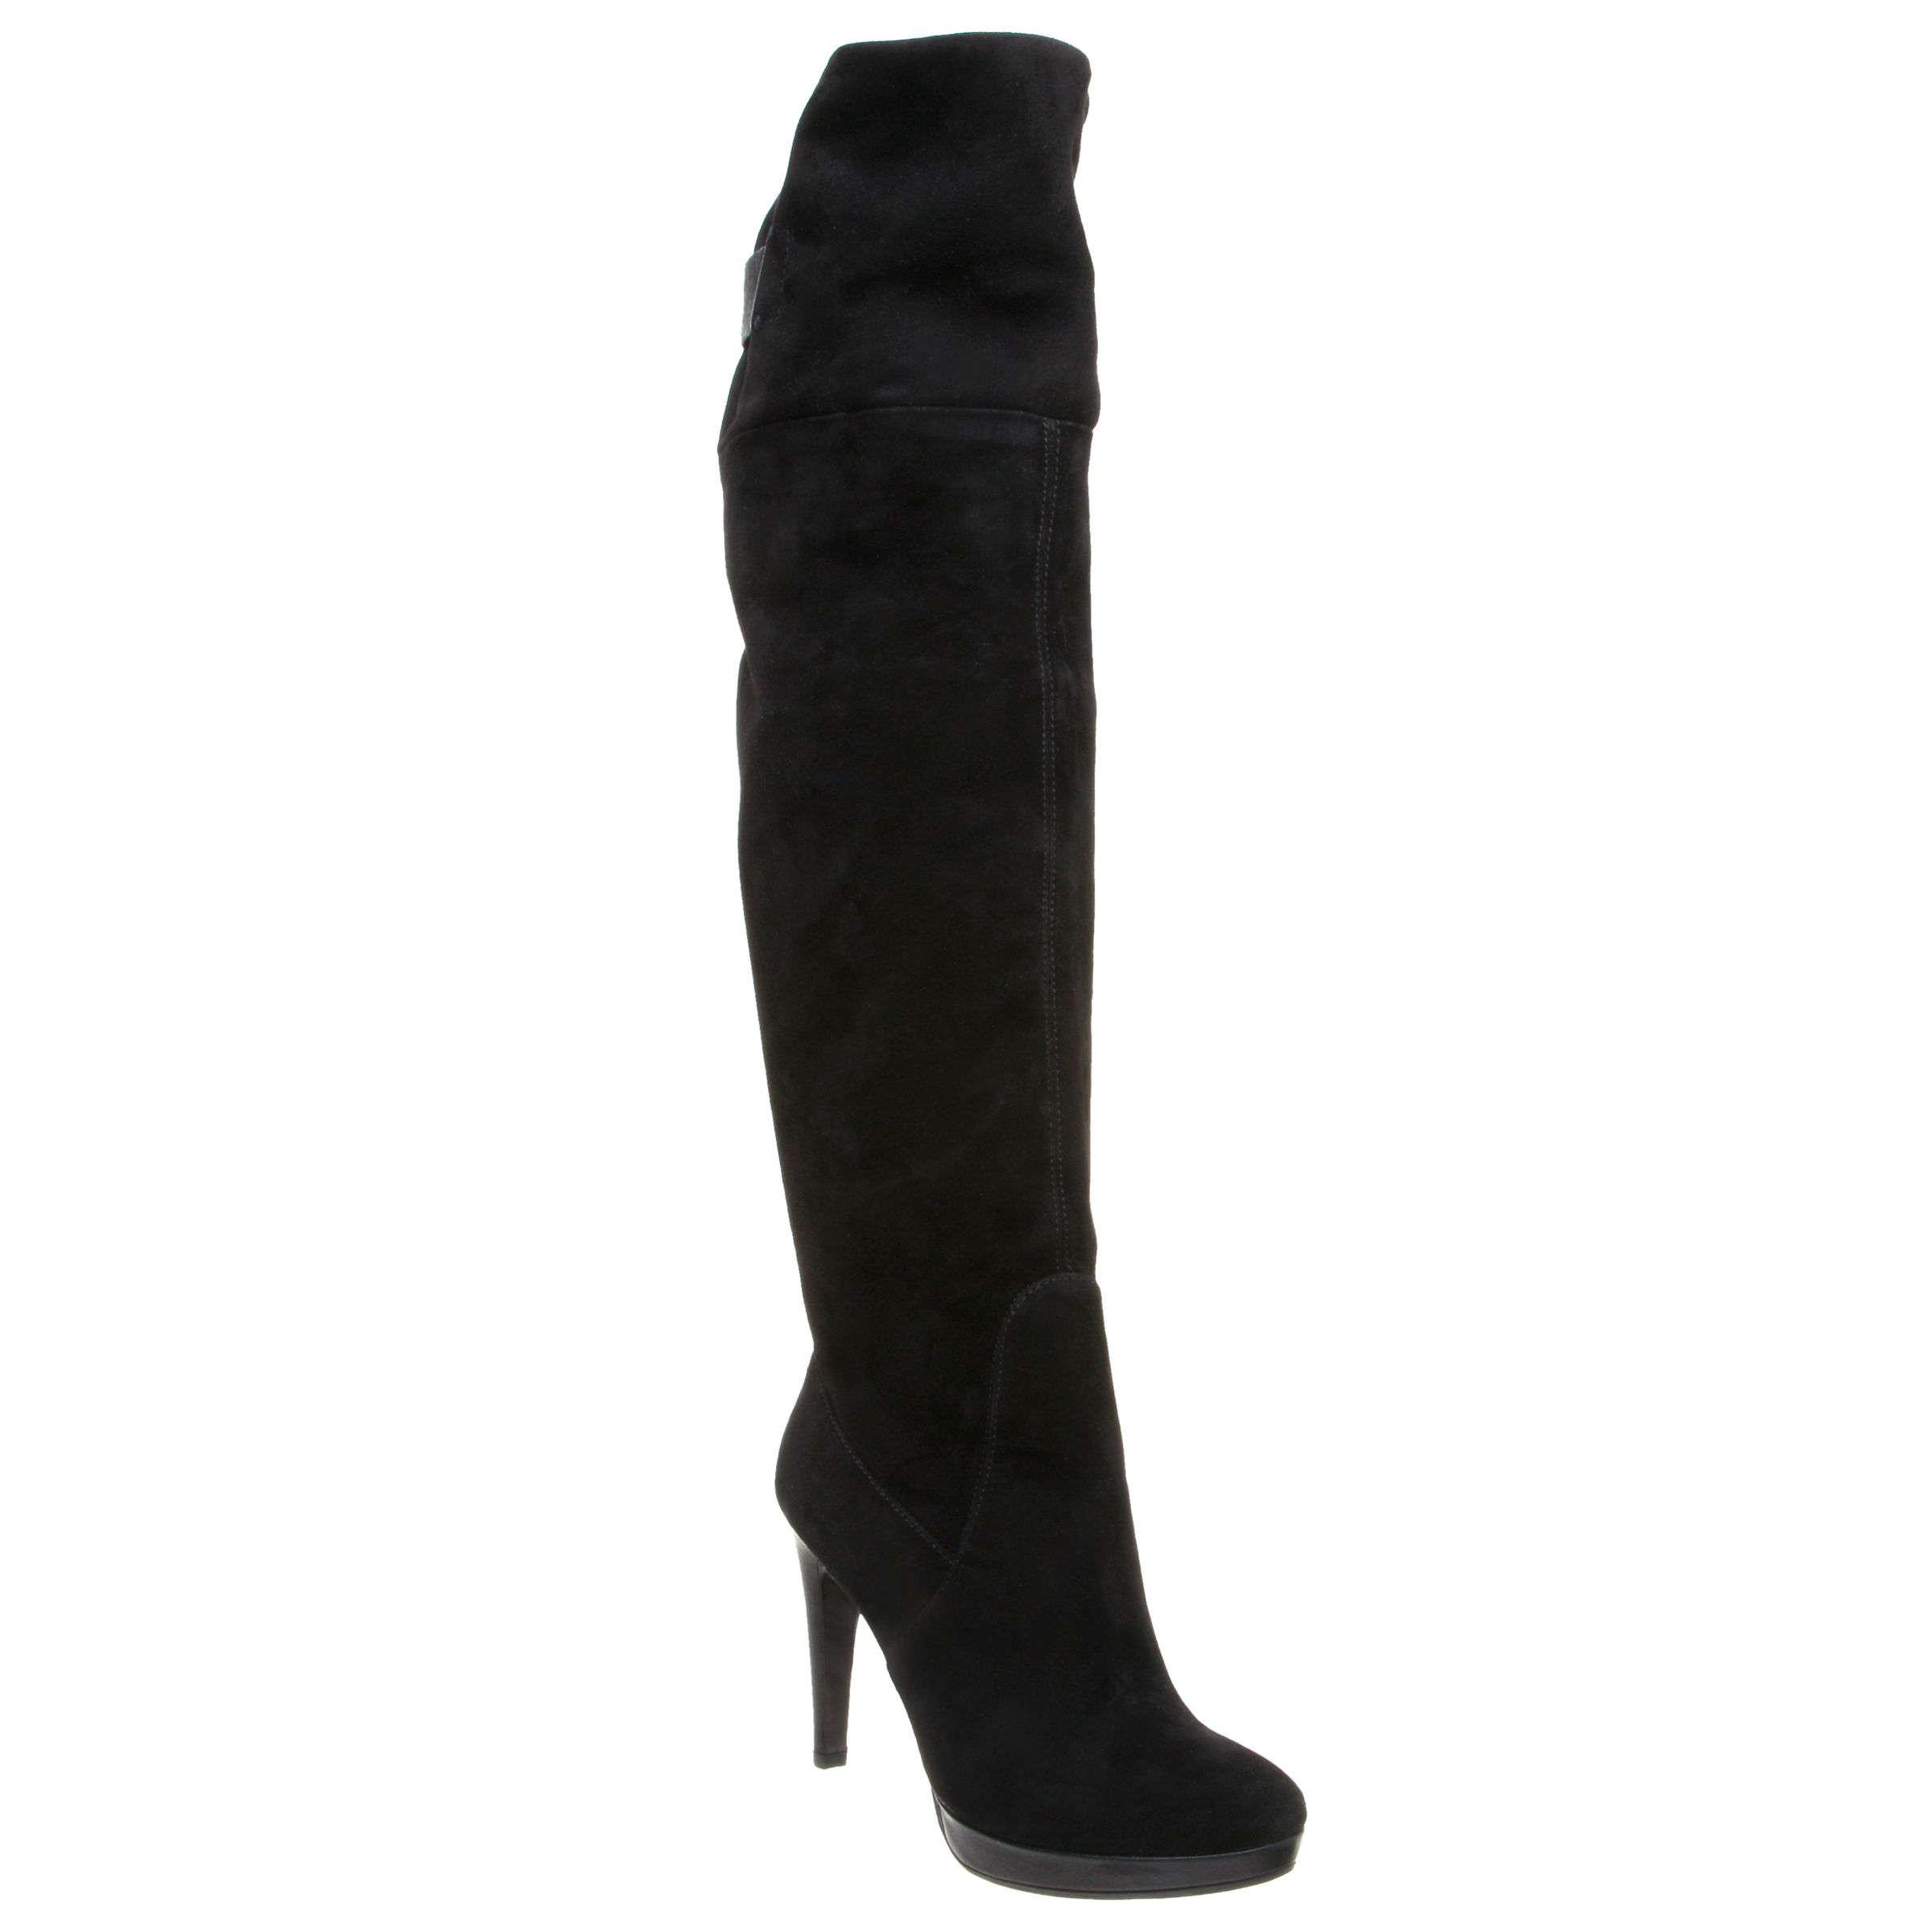 Pied A Terre Roswell Slouchy Cuff Over The Knee Boots, Black at John Lewis